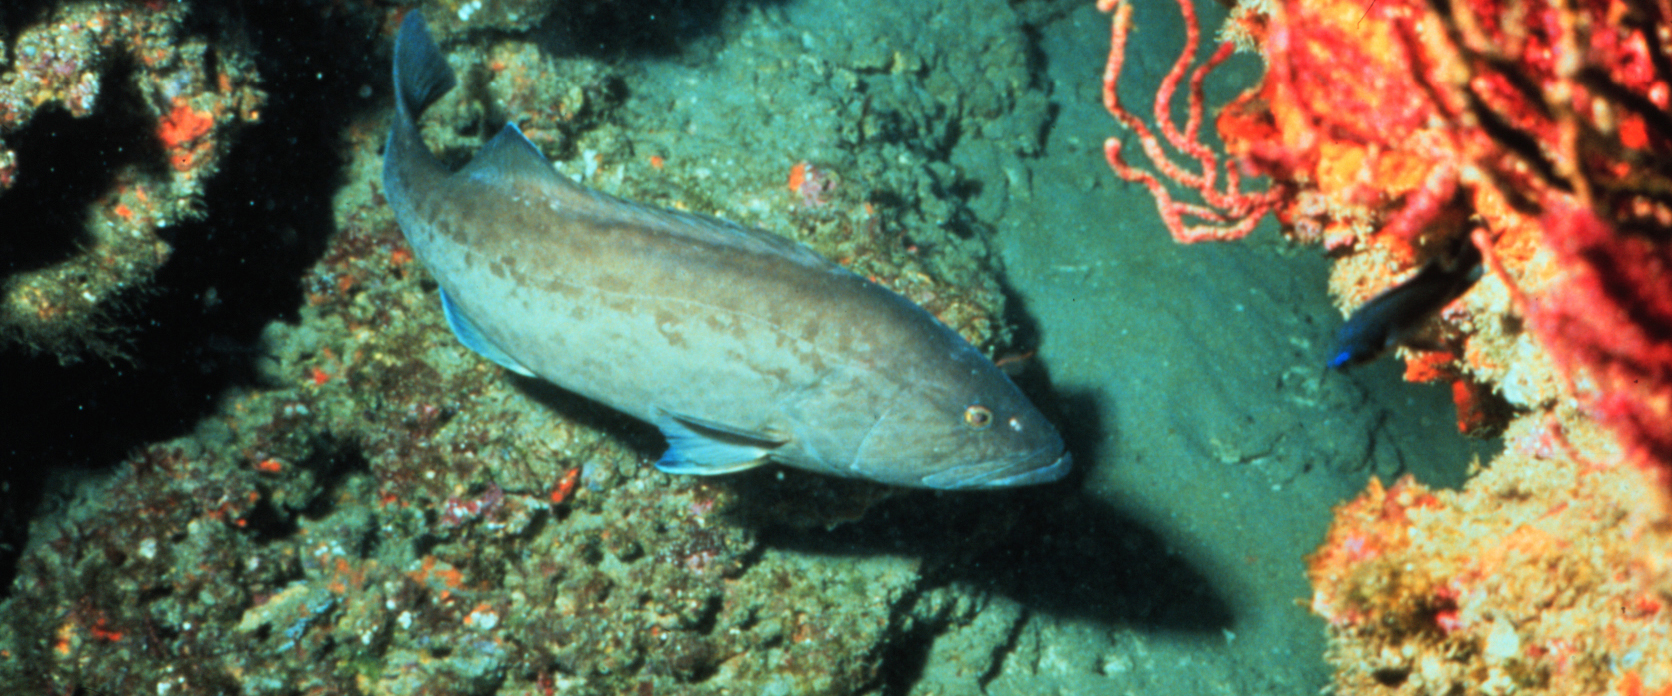 Gag groupers are a species targeted for restoration in the recreational fisheries barotrauma reduction project.